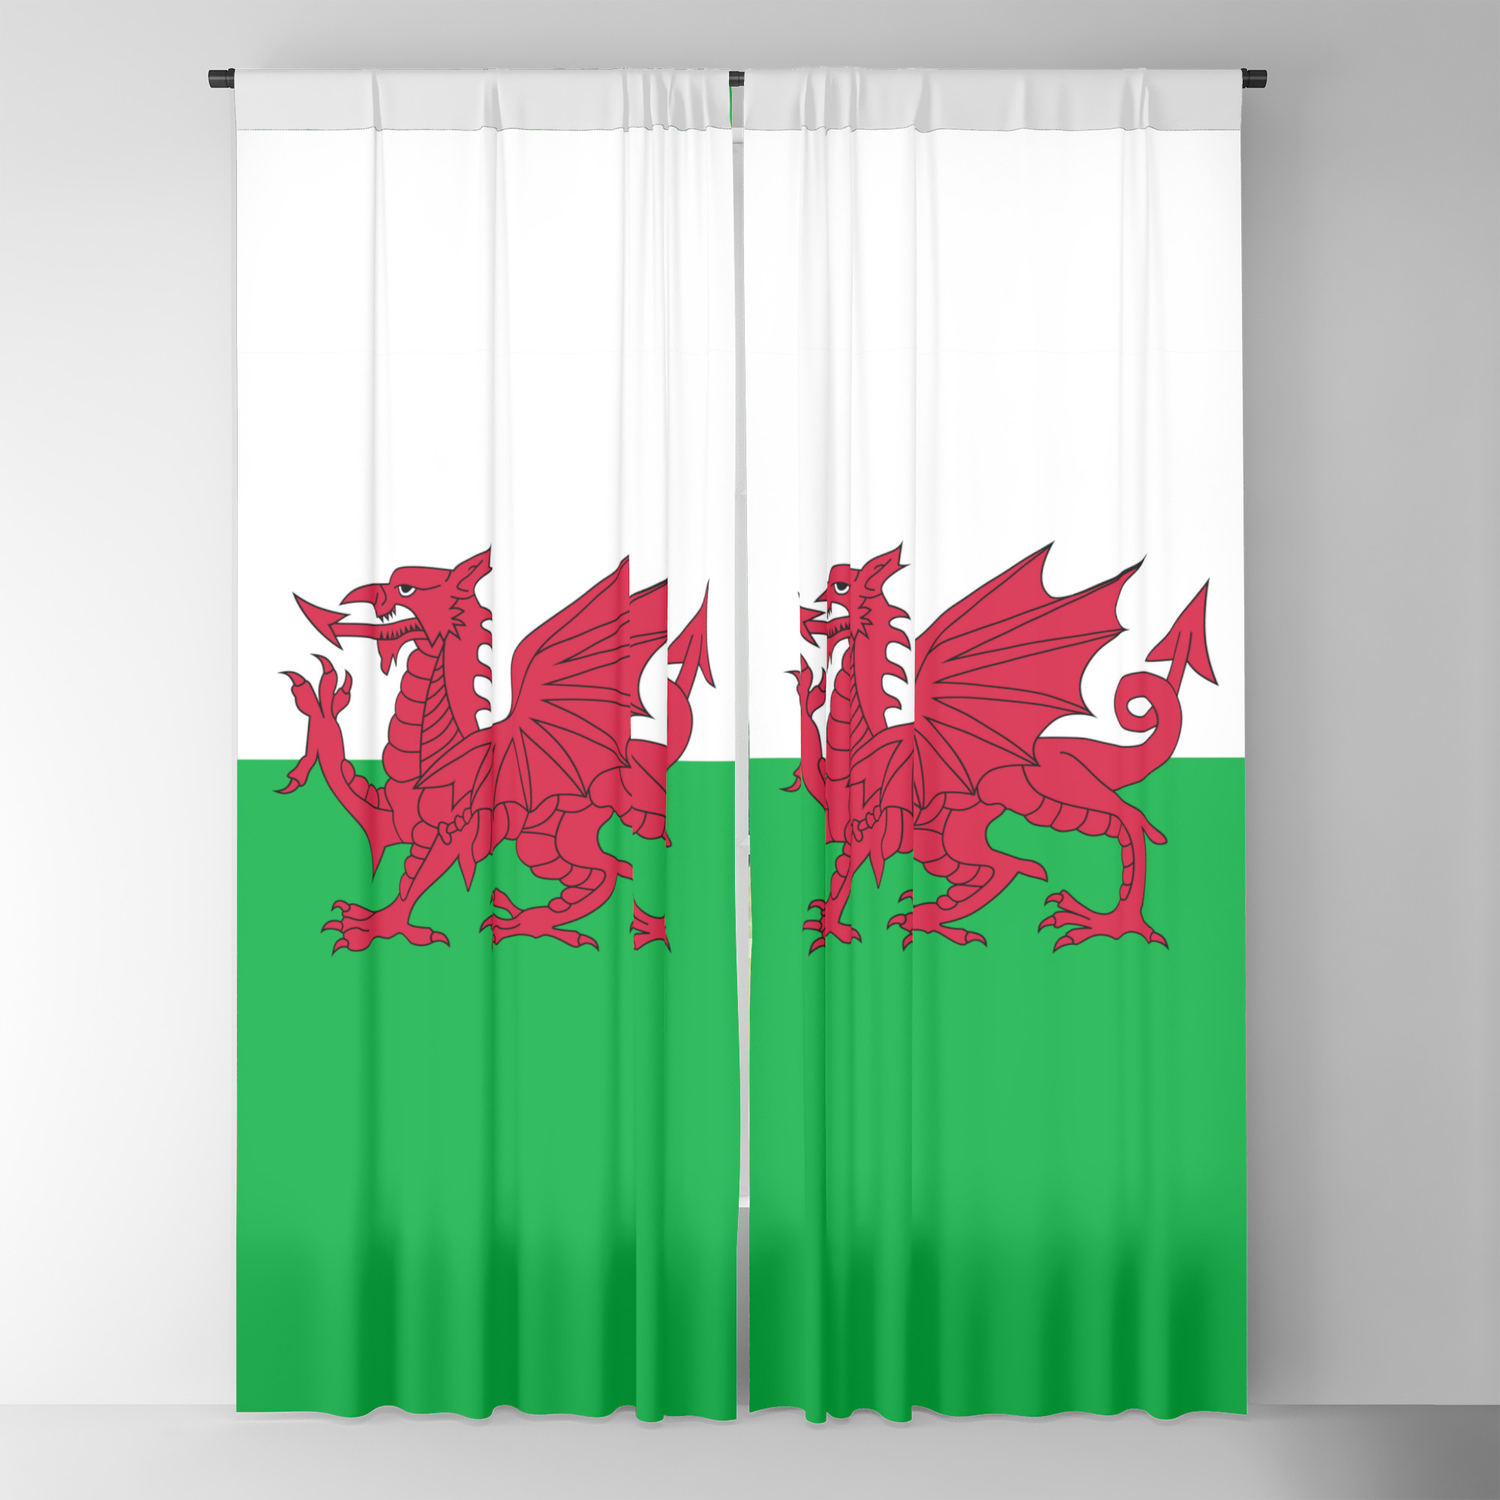 Wales Flag Printed Picture Welsh Photo Roller window Blind Blackout Option 